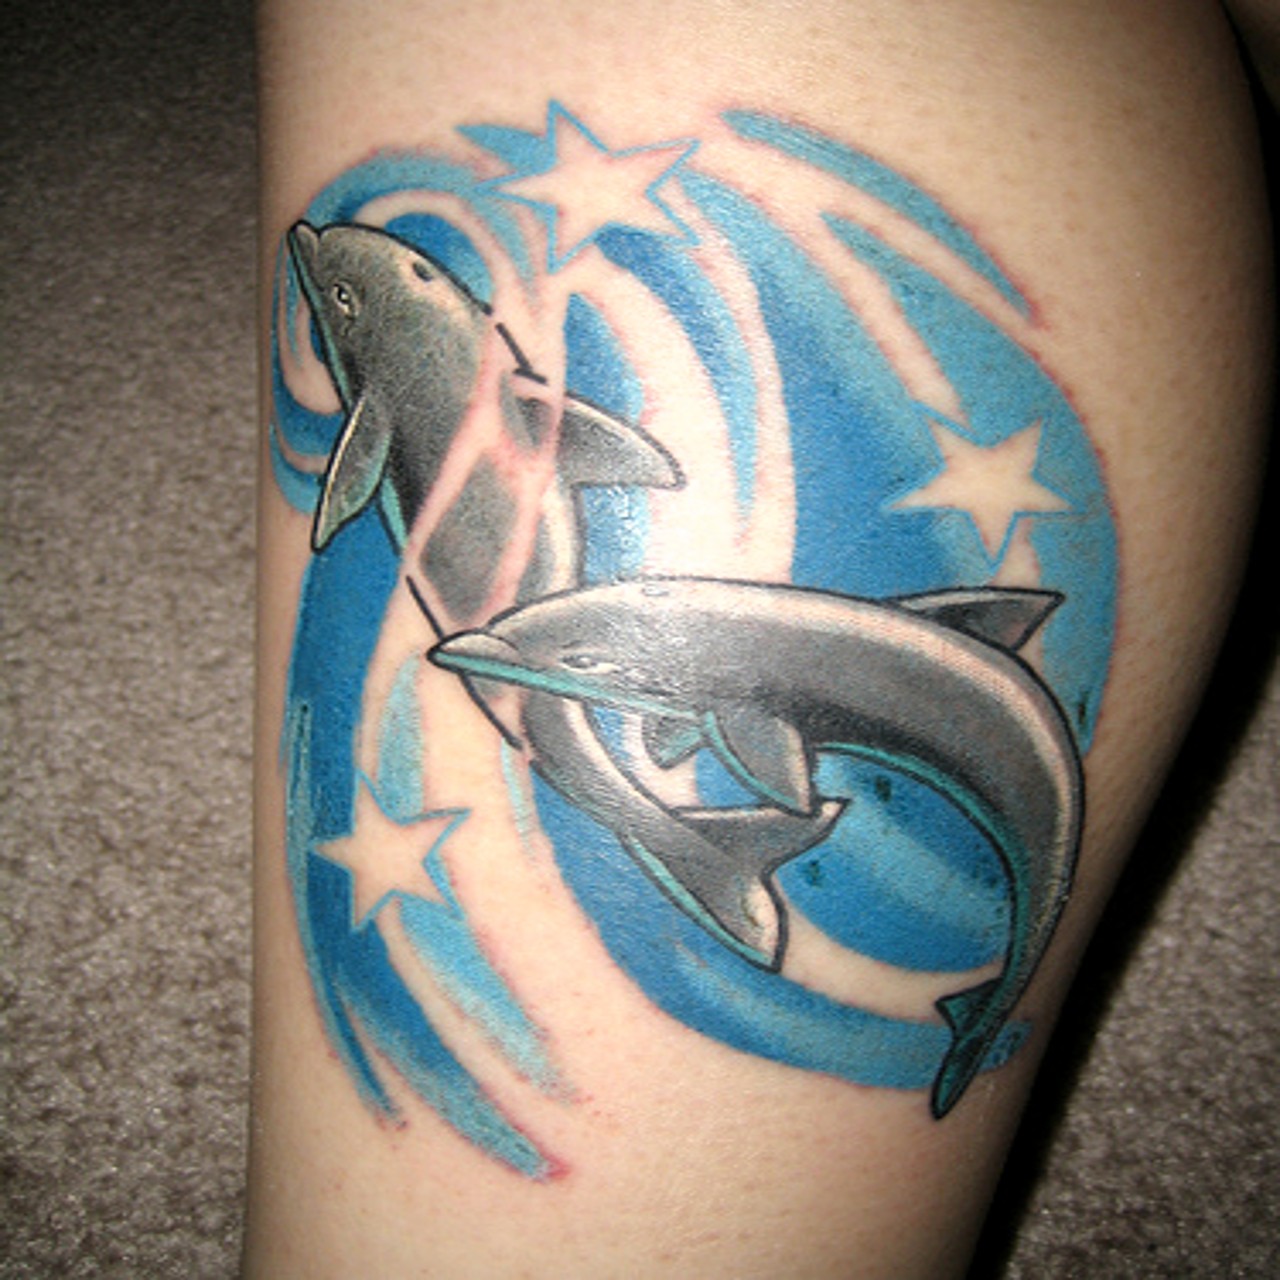 Dolphin Tattoos Designs, Ideas and Meaning - Tattoos For You